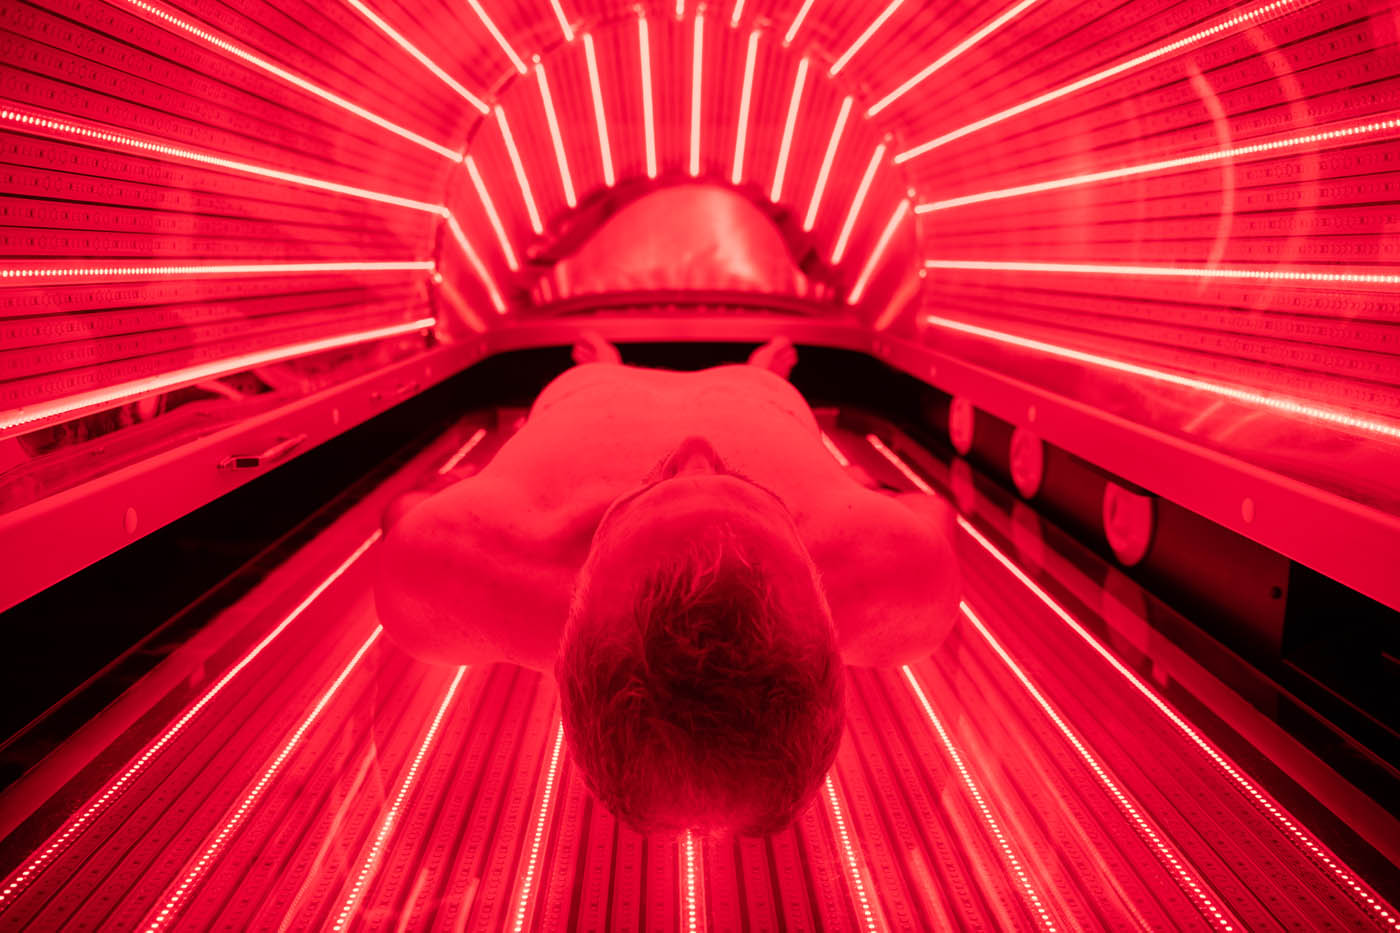 A man getting into a dark pod with bright red light, contact Light Lounge today for your infrared light therapy.